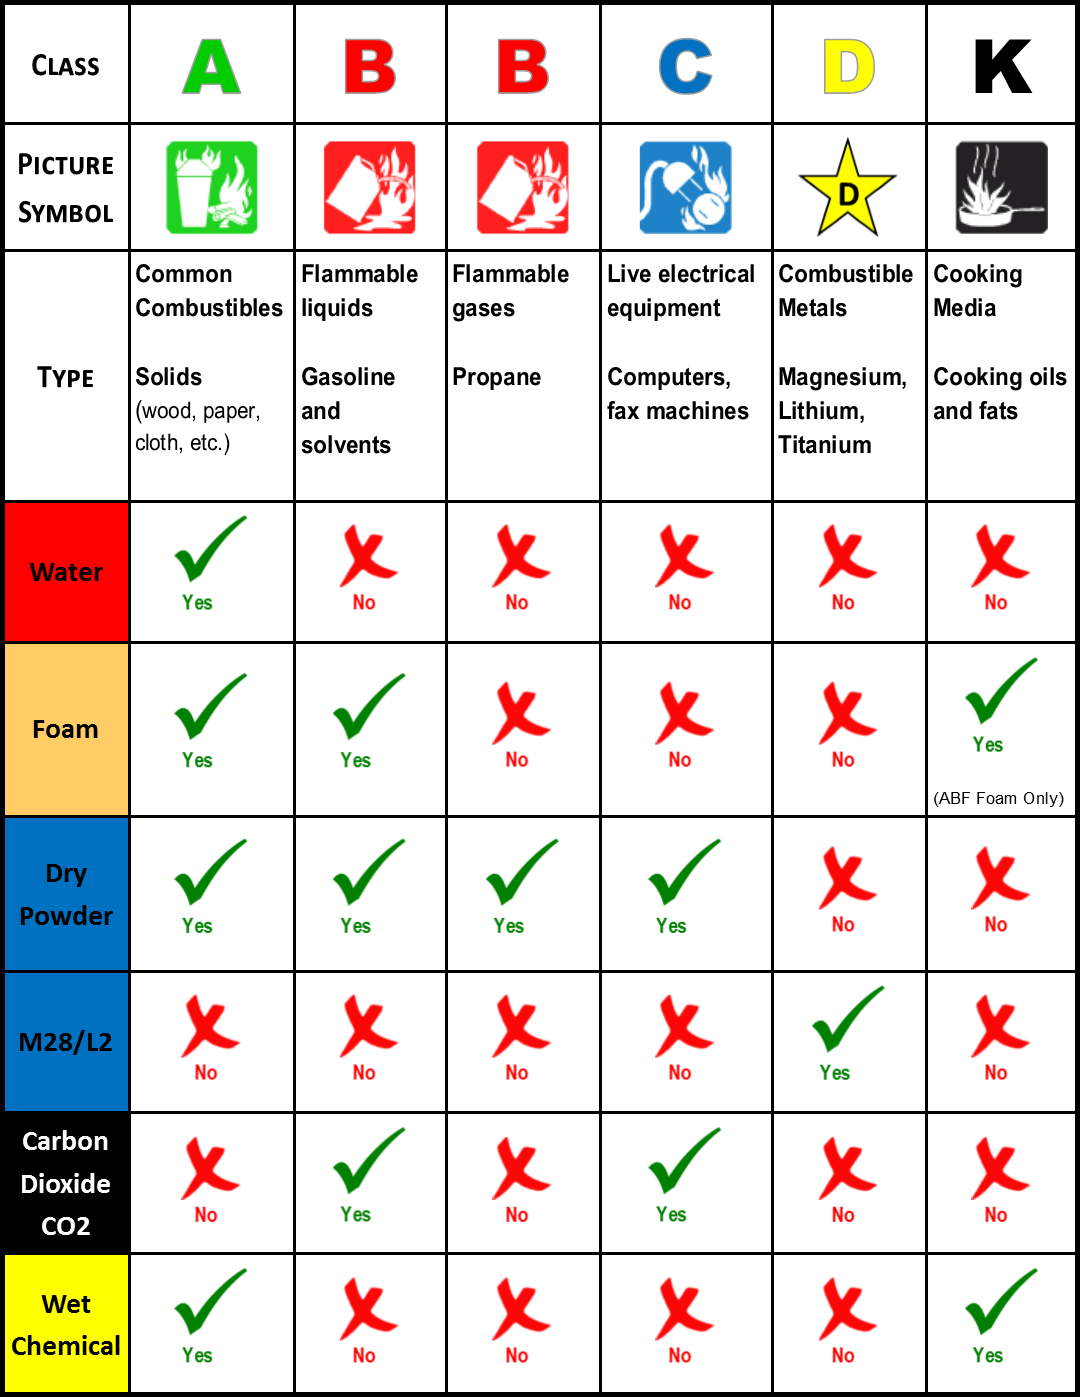 Fire extinguisher types.png